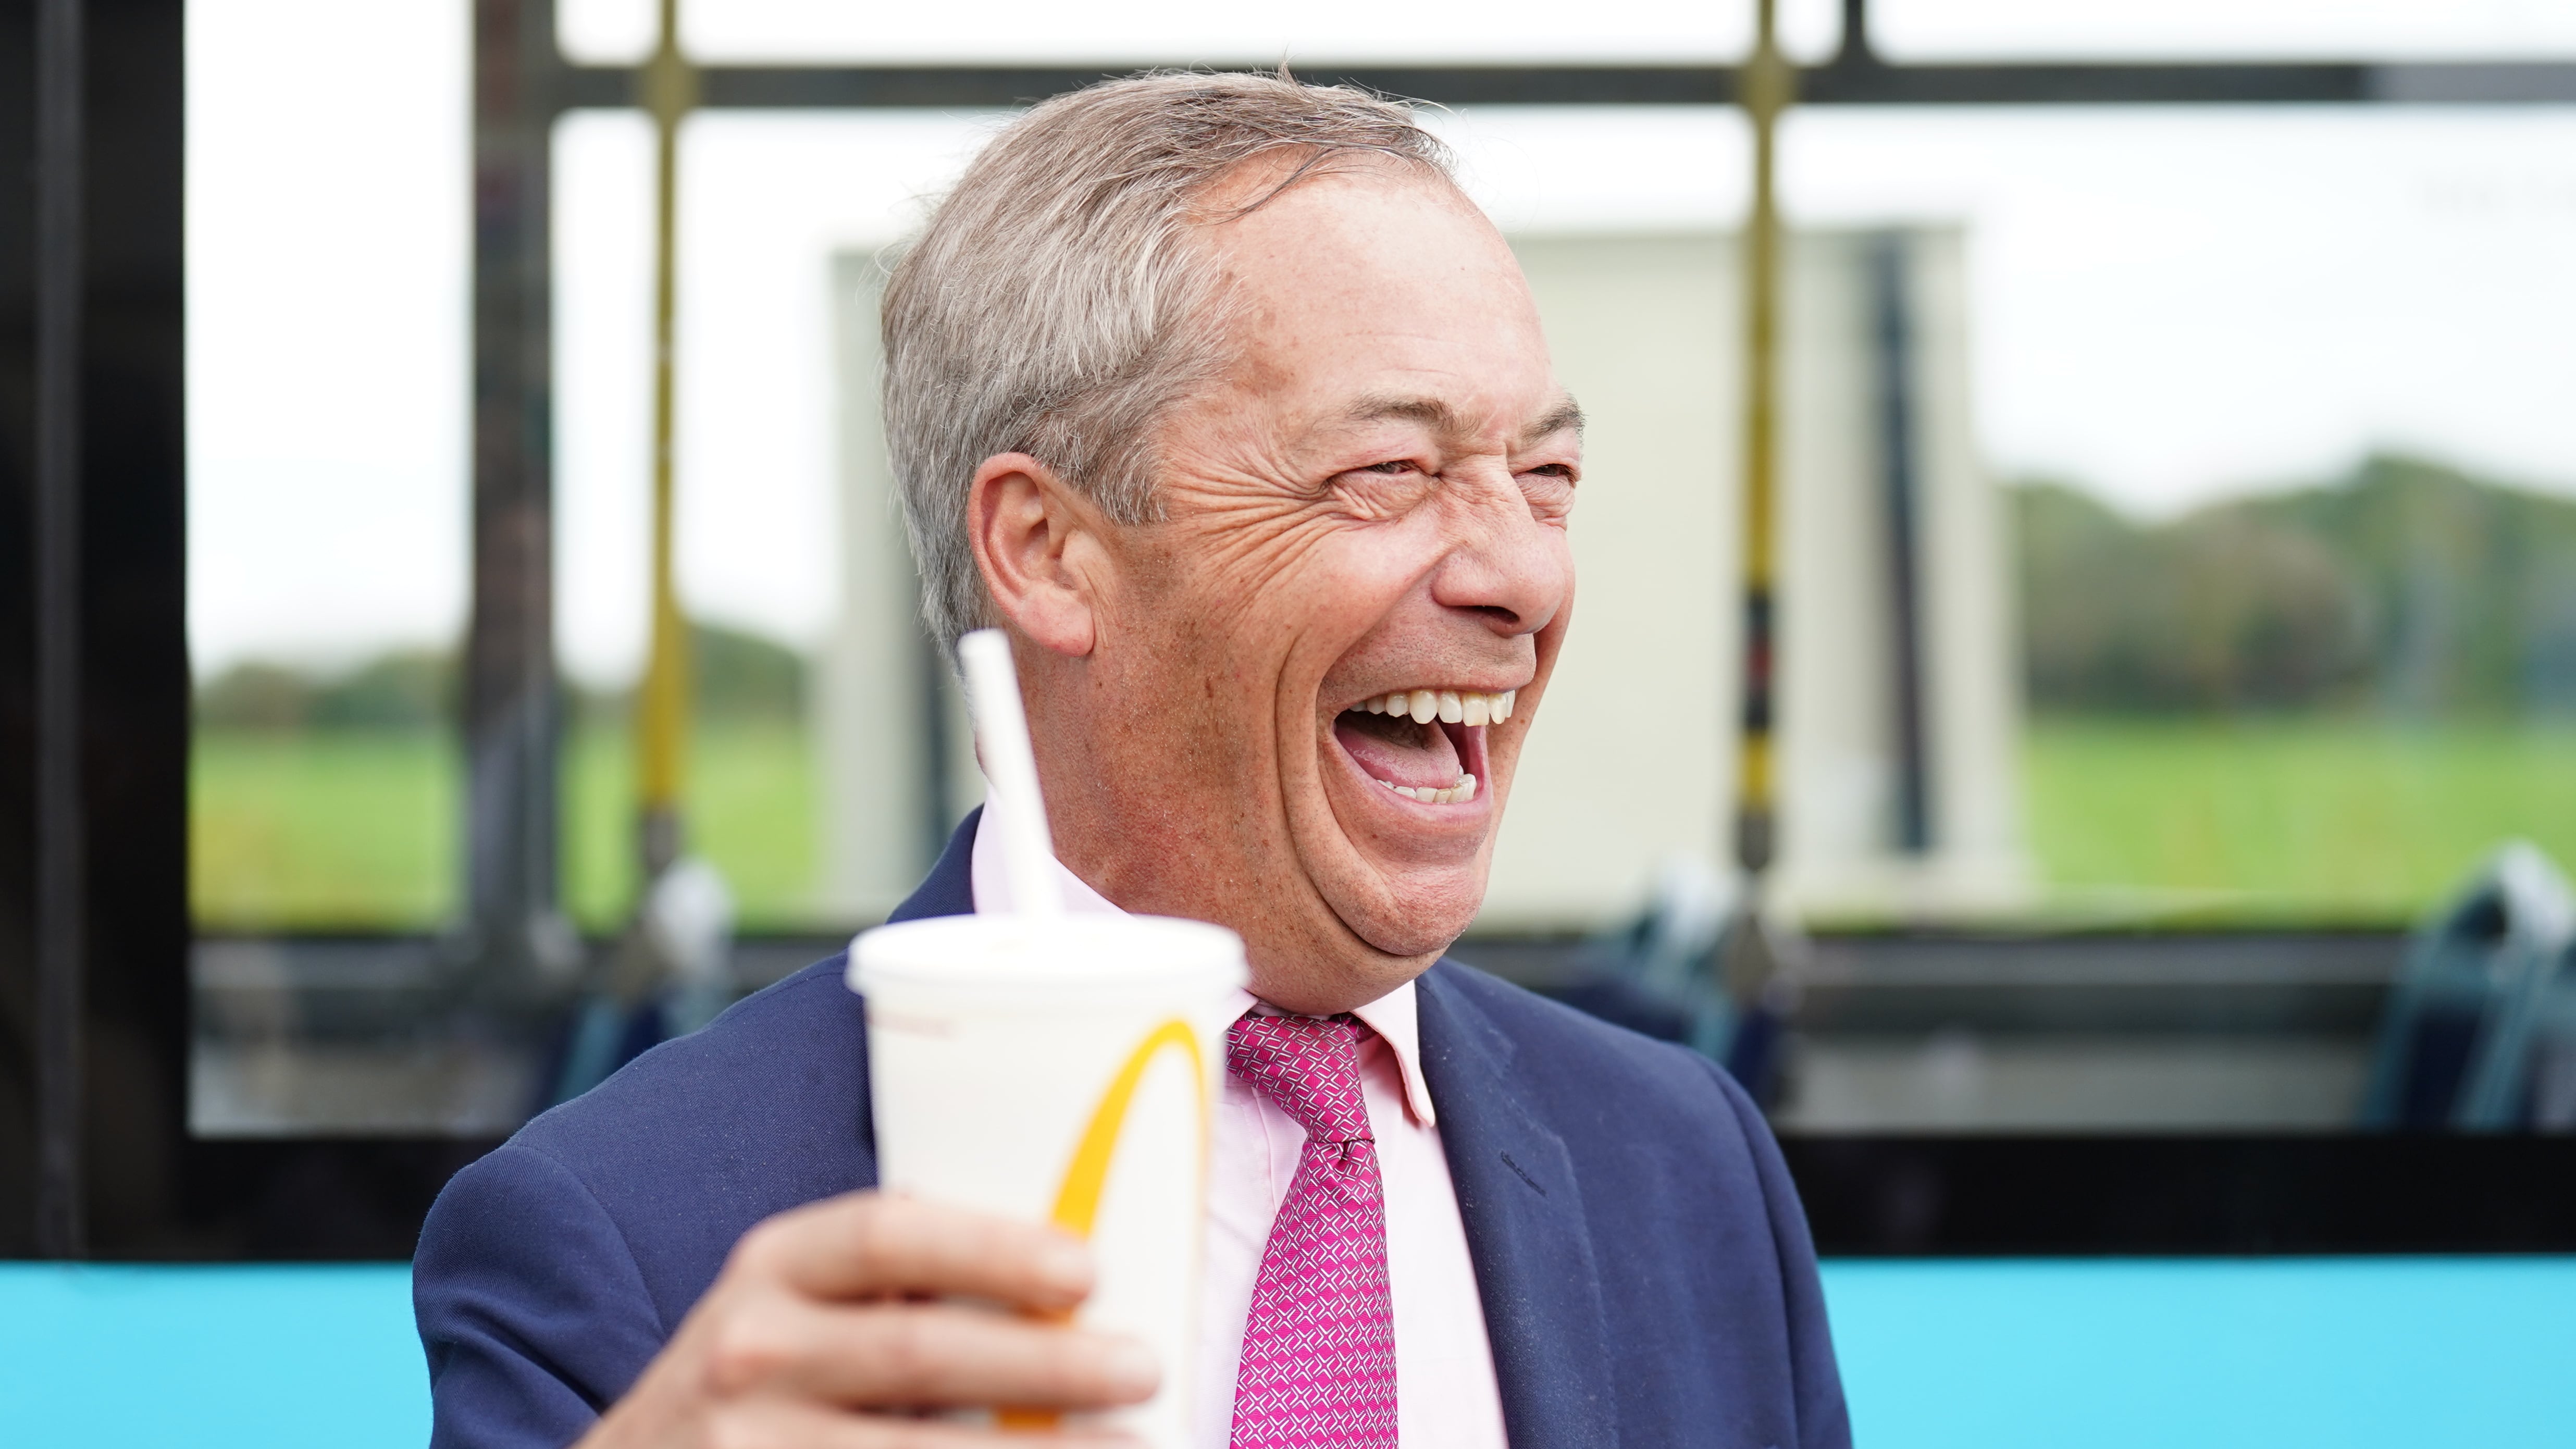 Nigel Farage’s Reform party looks set to win 13 seats at Westminster